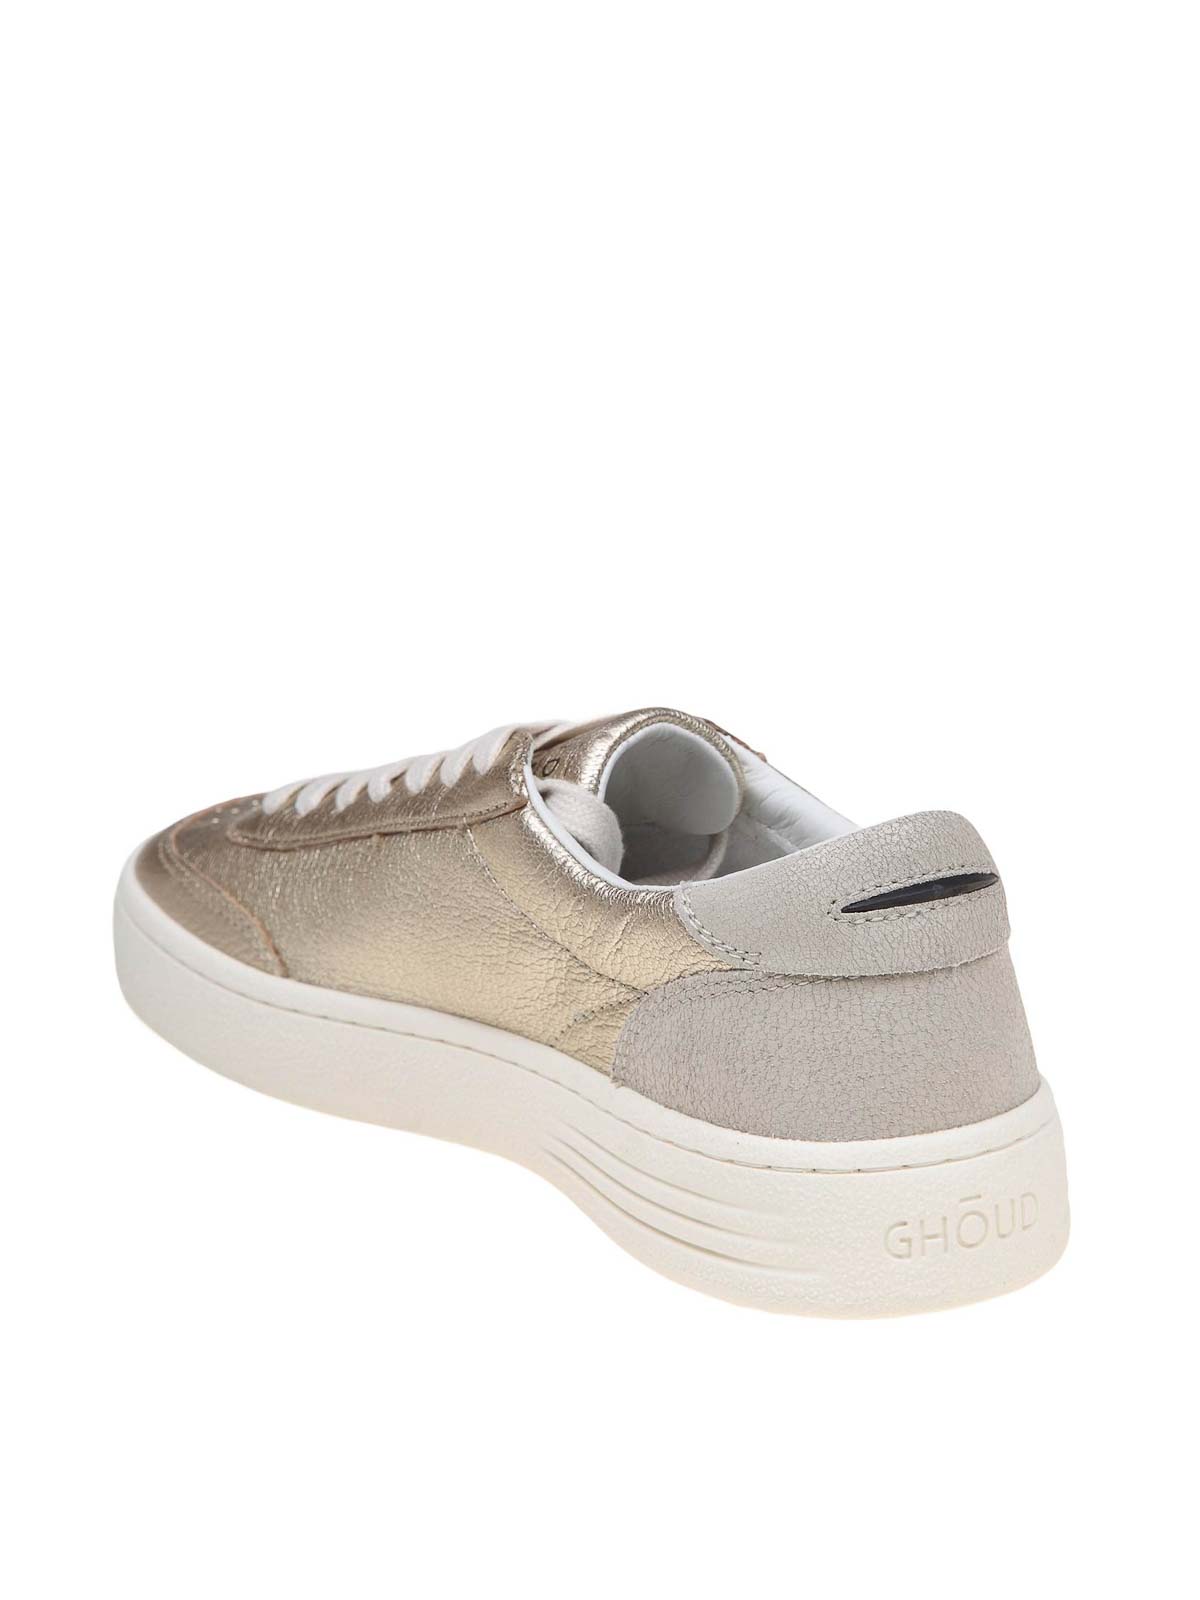 Shop Ghoud Venice Leather Sneakers In White Gold